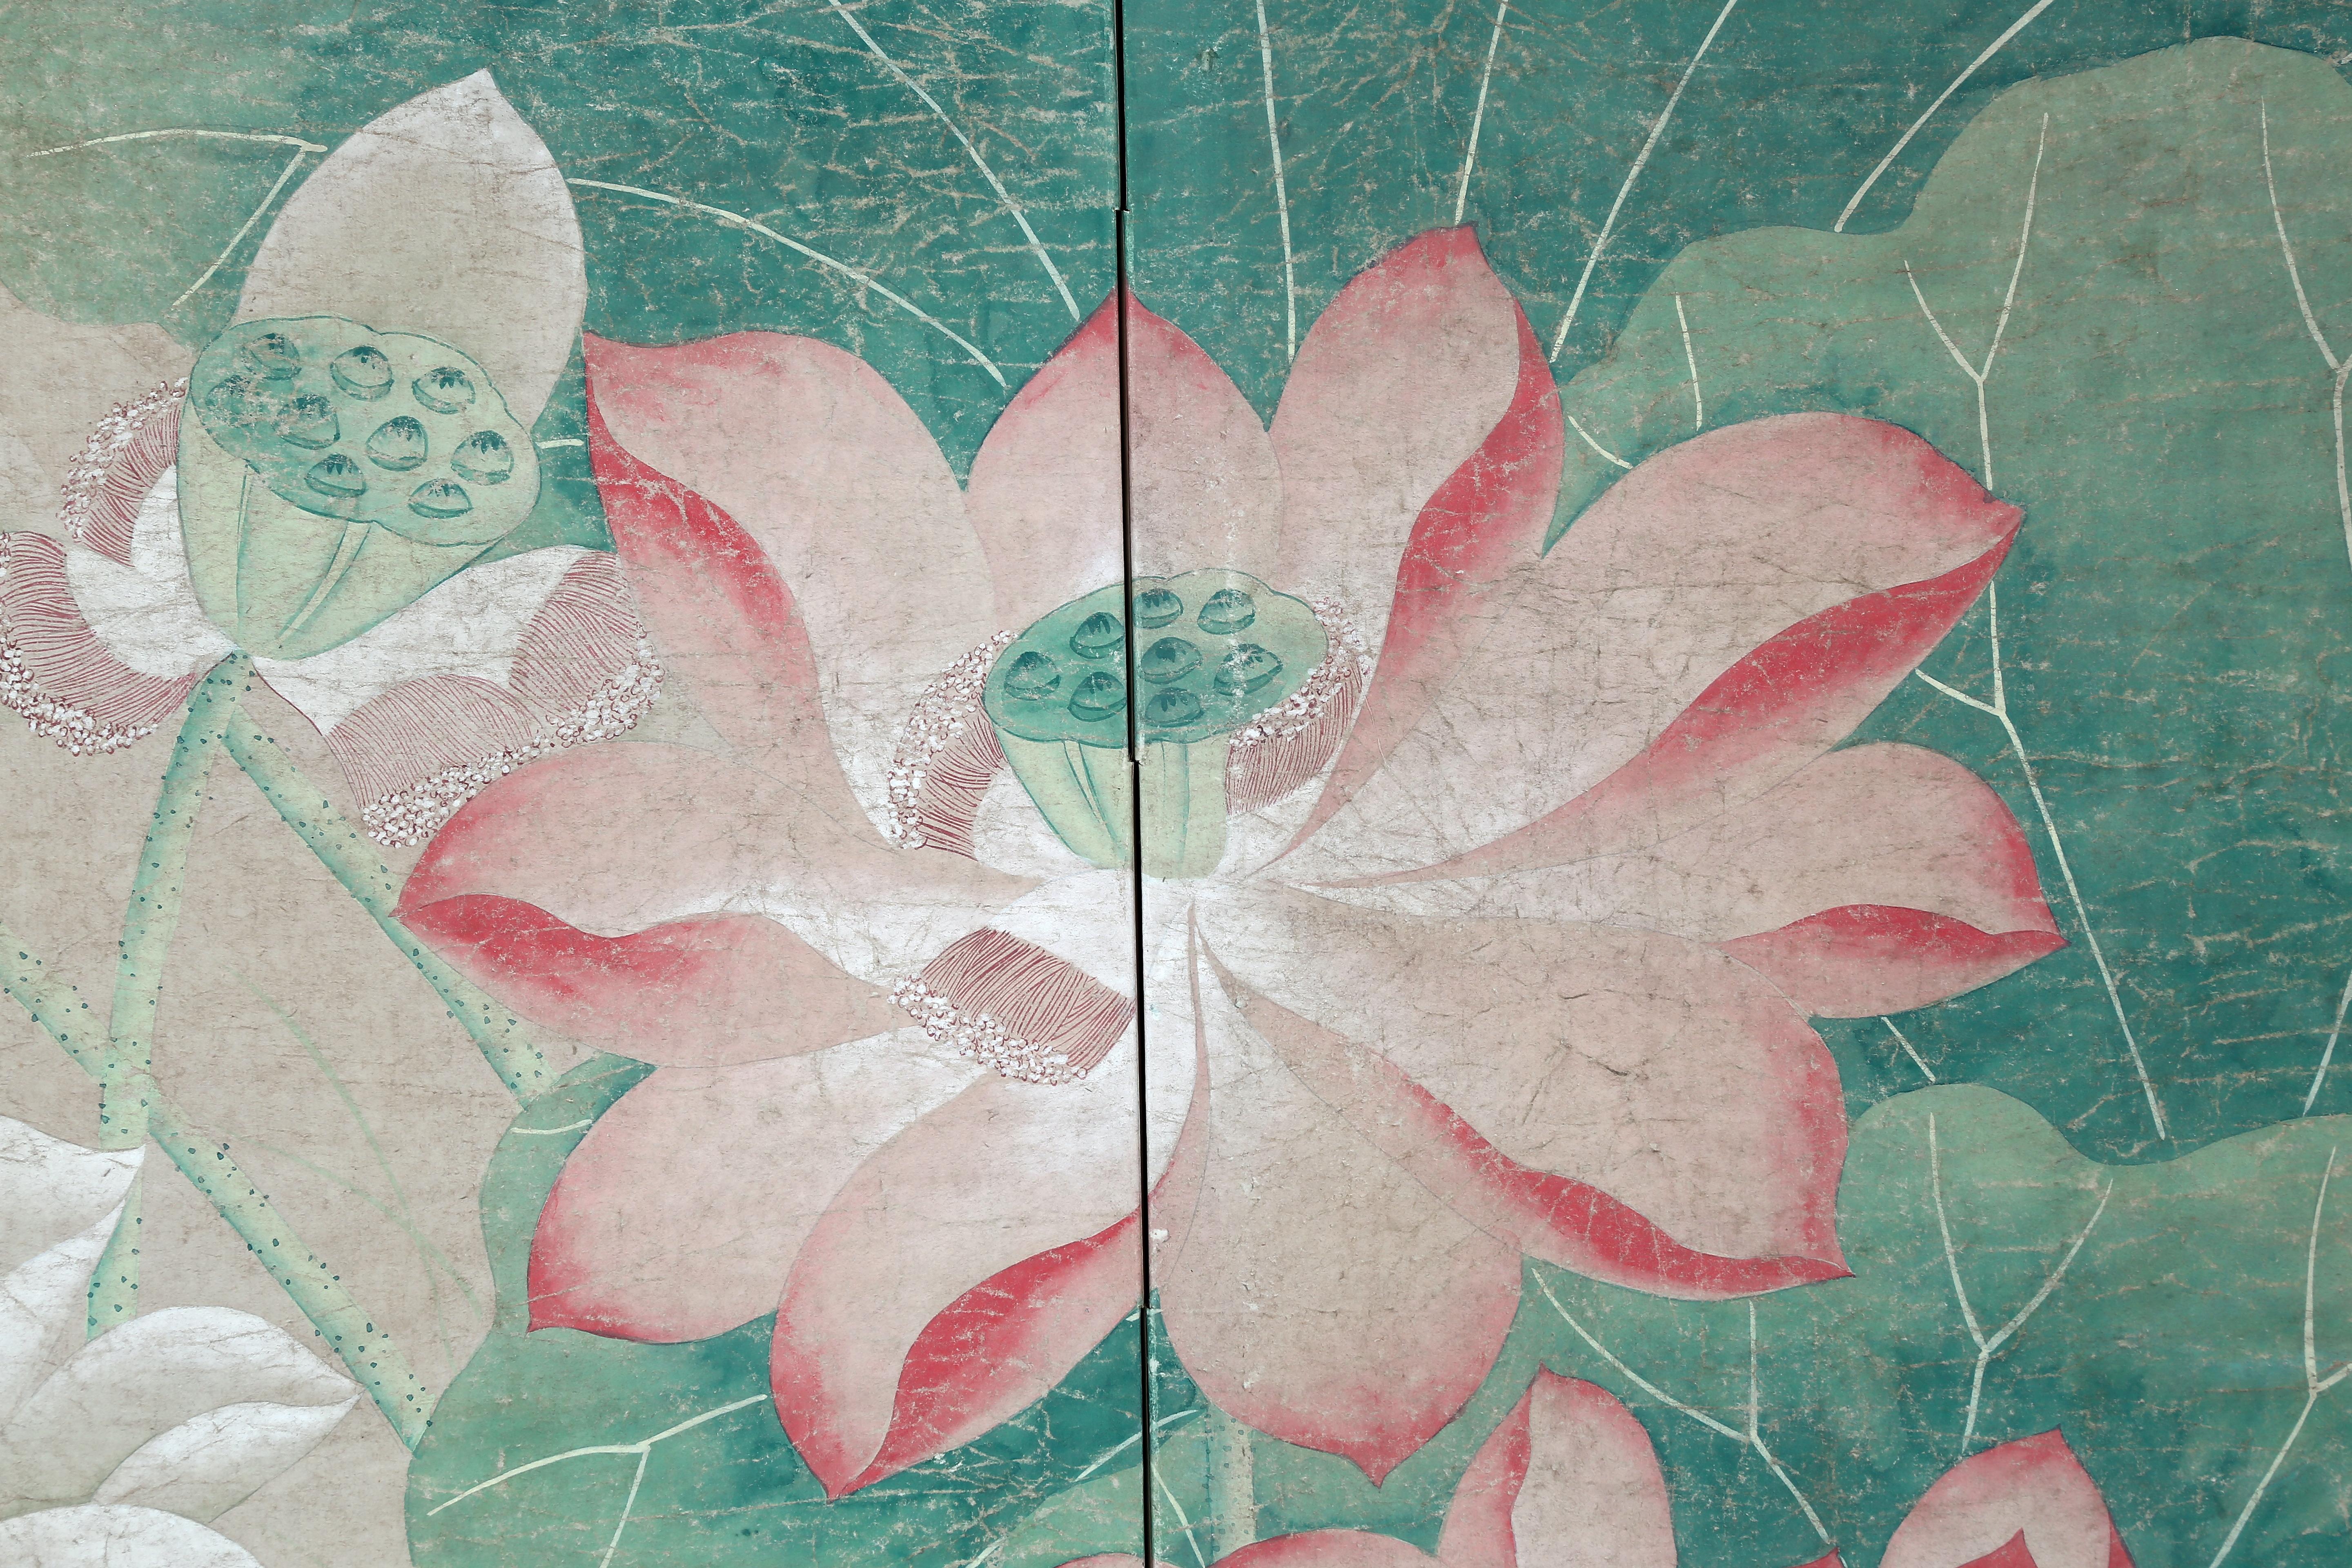 The lotus pond painting of this four-panel screen is hand painted in watercolor, on the paper base over carefully jointed wooden lattice frames. Lacquer rails are then applied to the perimeter to finish the edges of the screen and provide support.